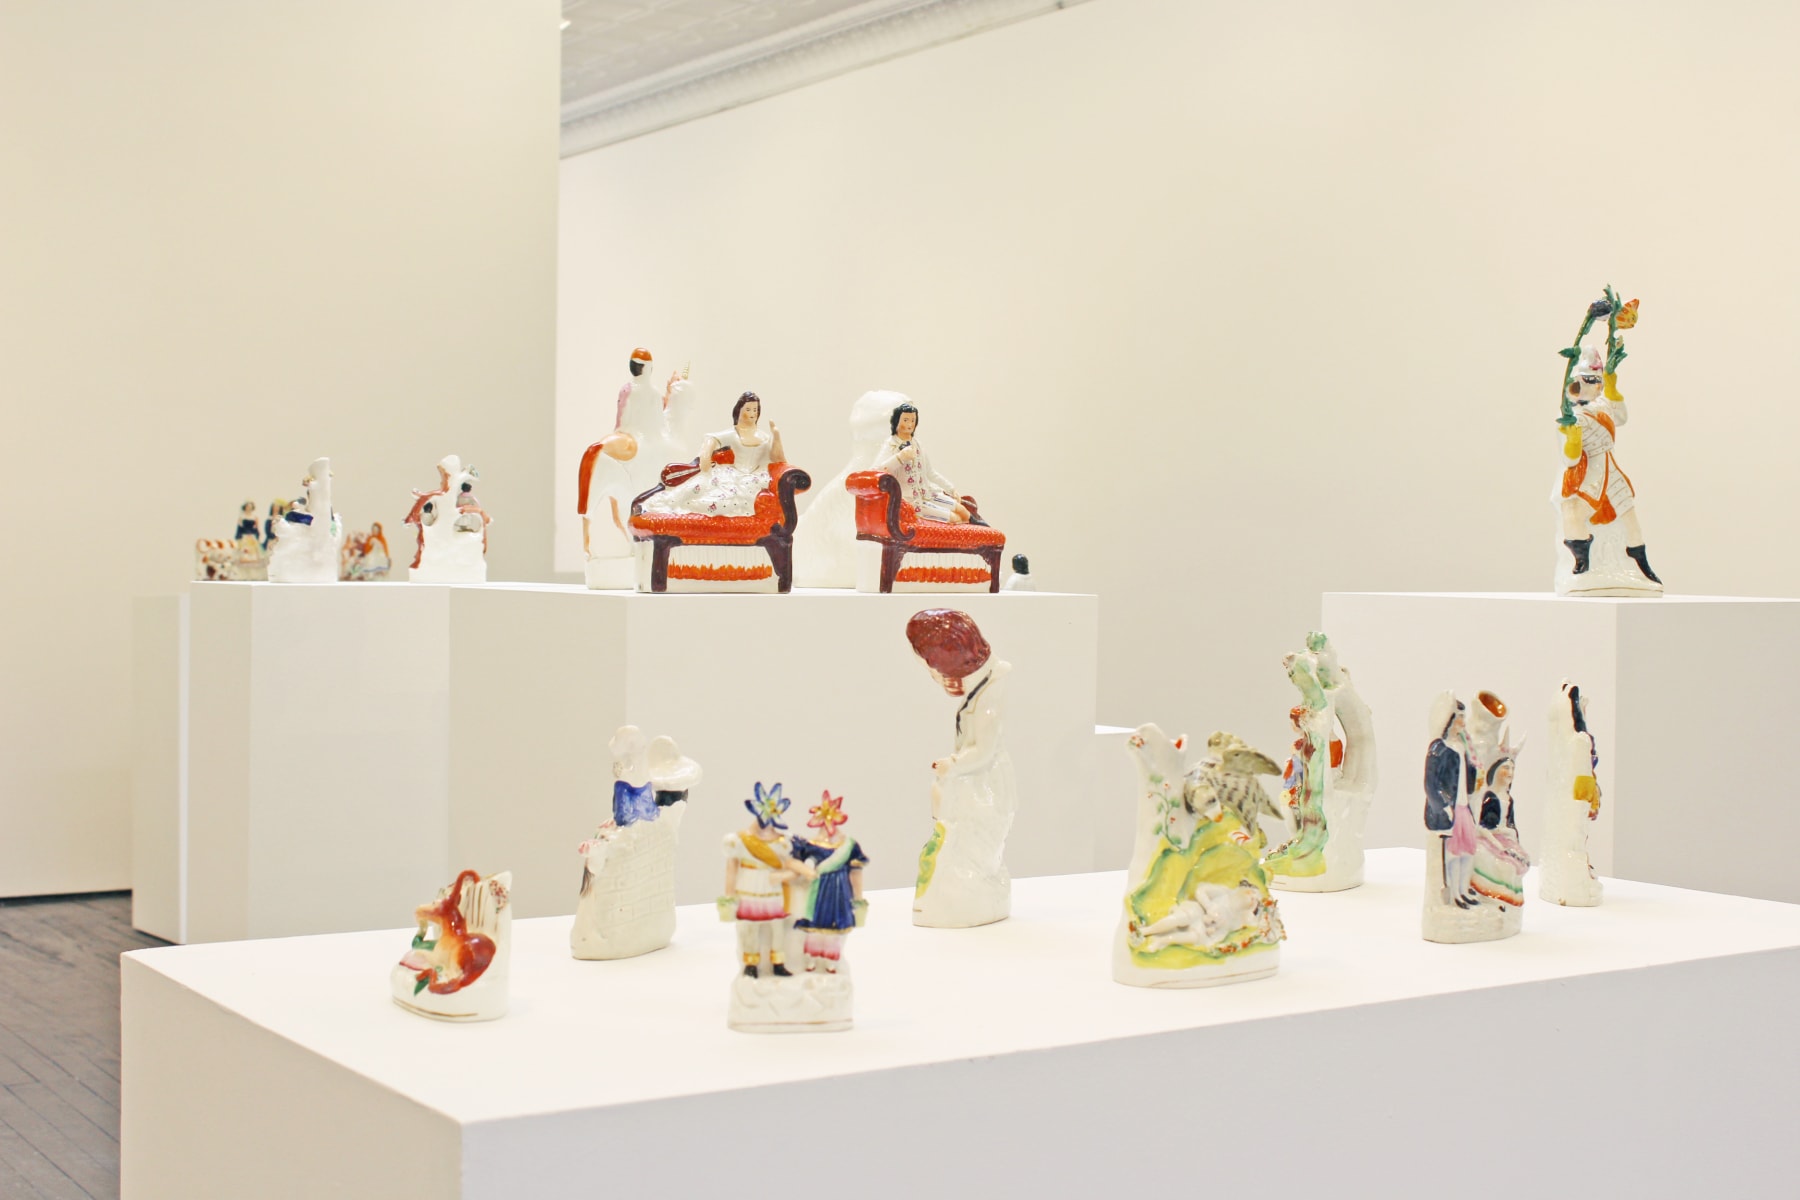 Installation view of&nbsp;The Unfortunate Souvenirs of Our Time